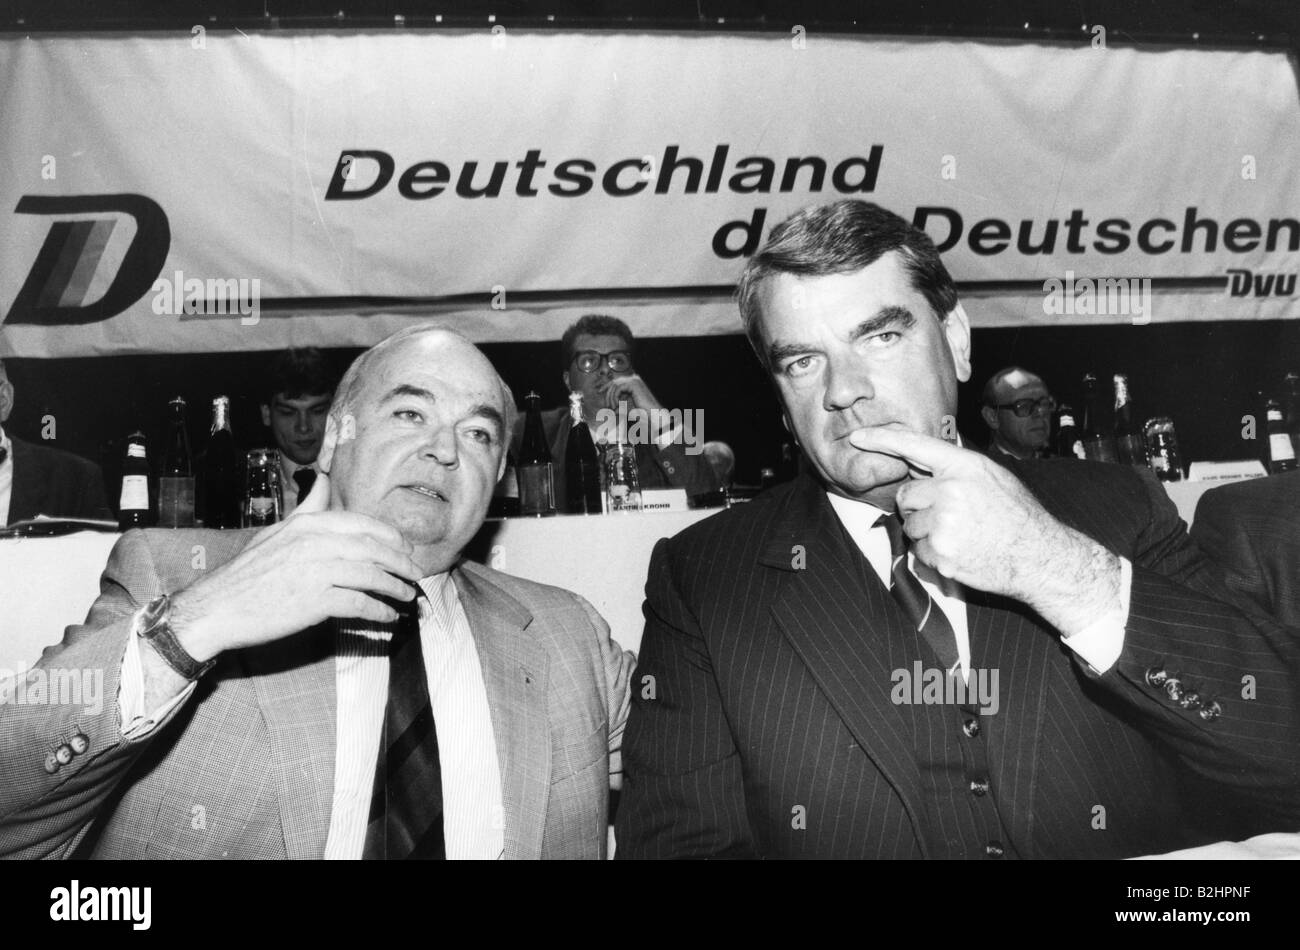 Frey, Gerhard, 18.12.1933 - 19.2.2013, German publisher and politician (DVU), with the British historian David Irving, meeting of the German Peoples Union, 1990s, , Stock Photo